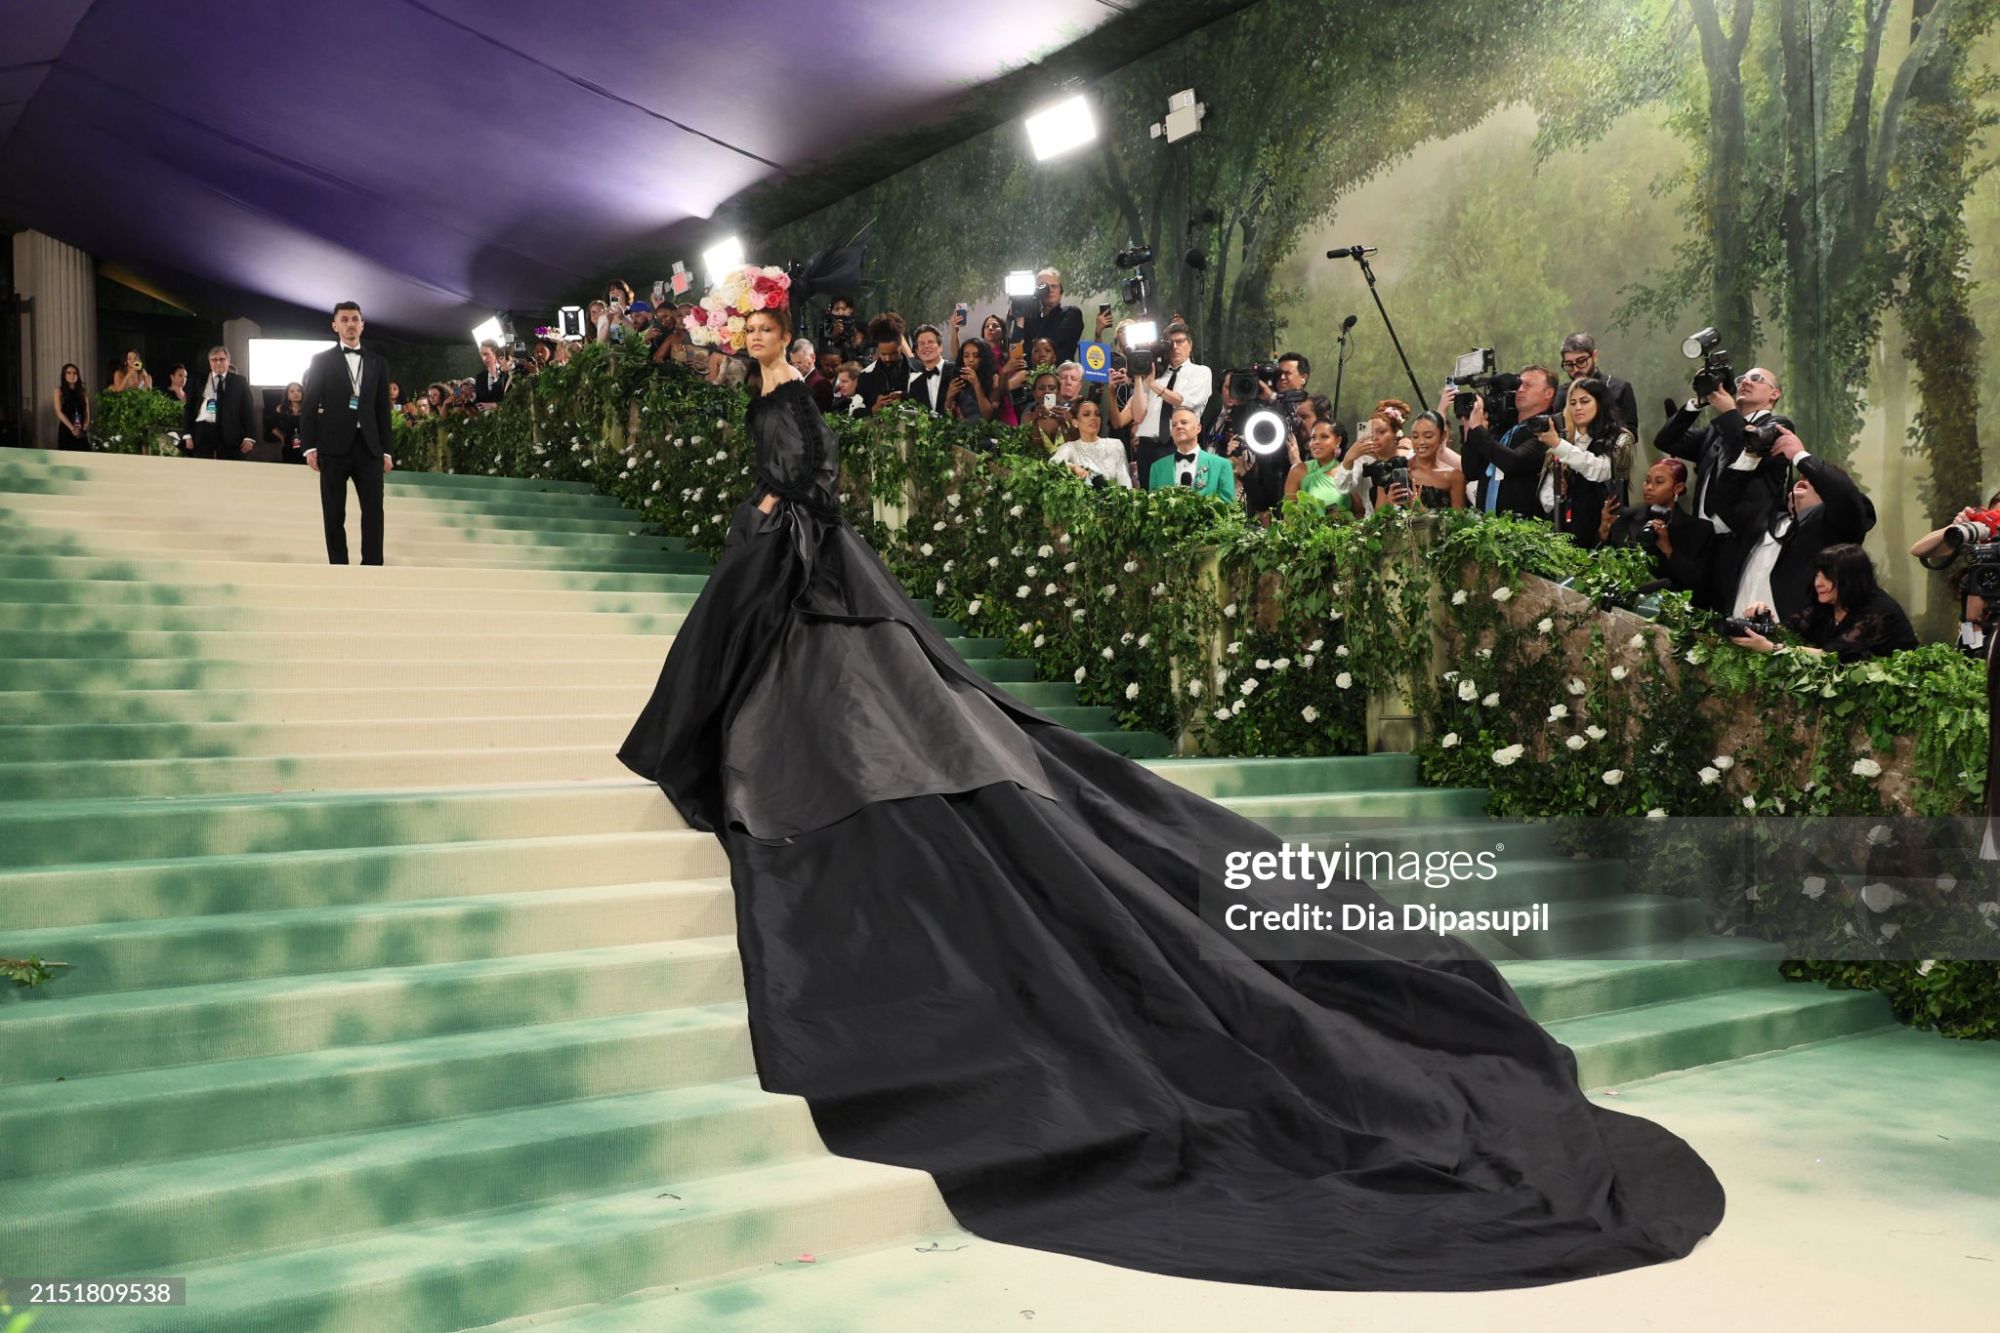 gettyimages-2151809538-2048x2048.jpg